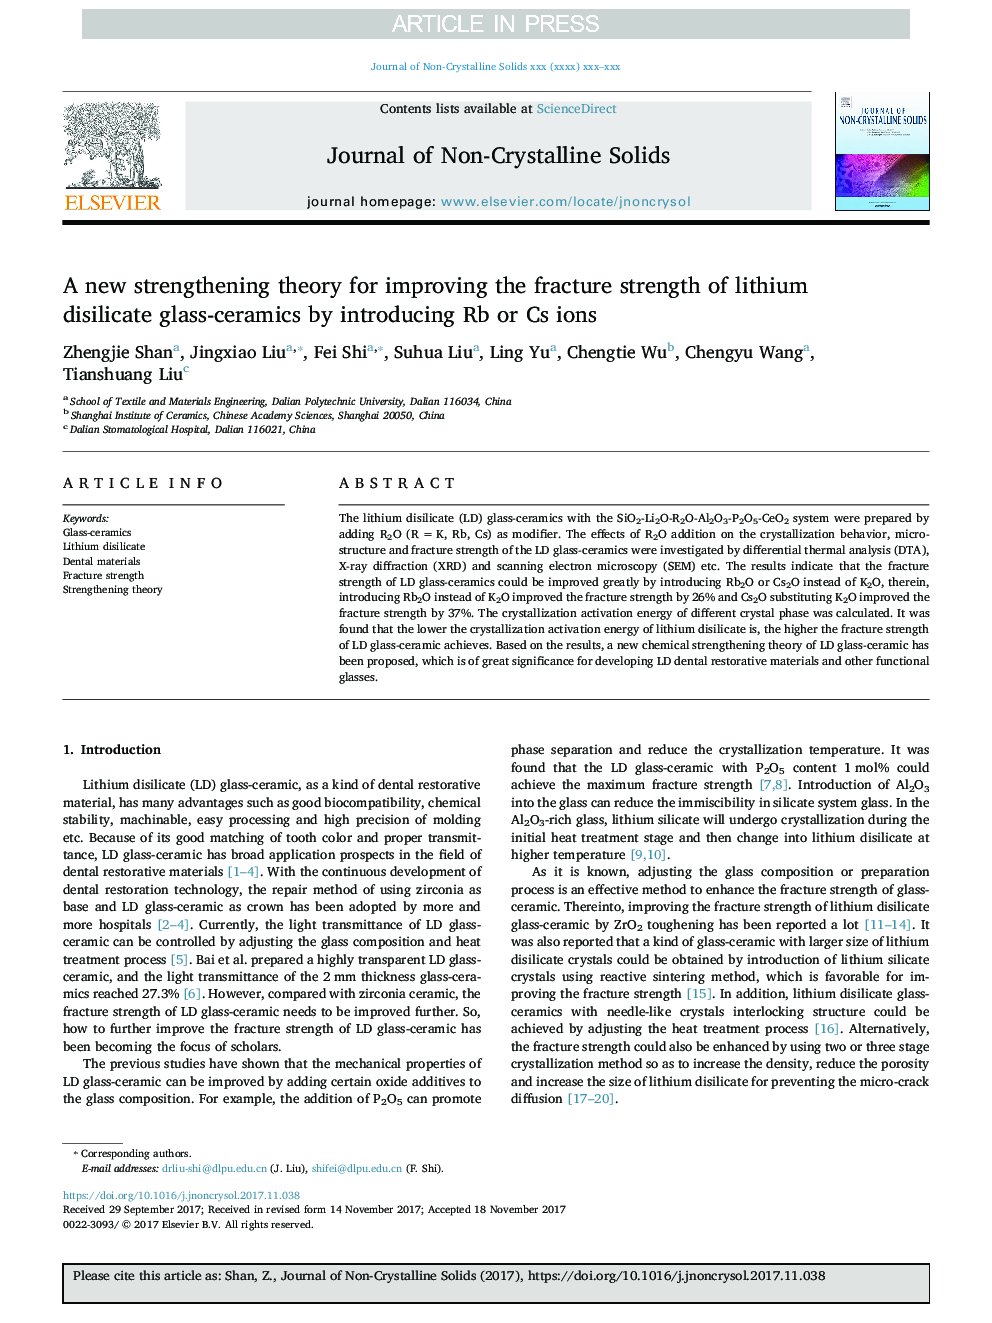 A new strengthening theory for improving the fracture strength of lithium disilicate glass-ceramics by introducing Rb or Cs ions